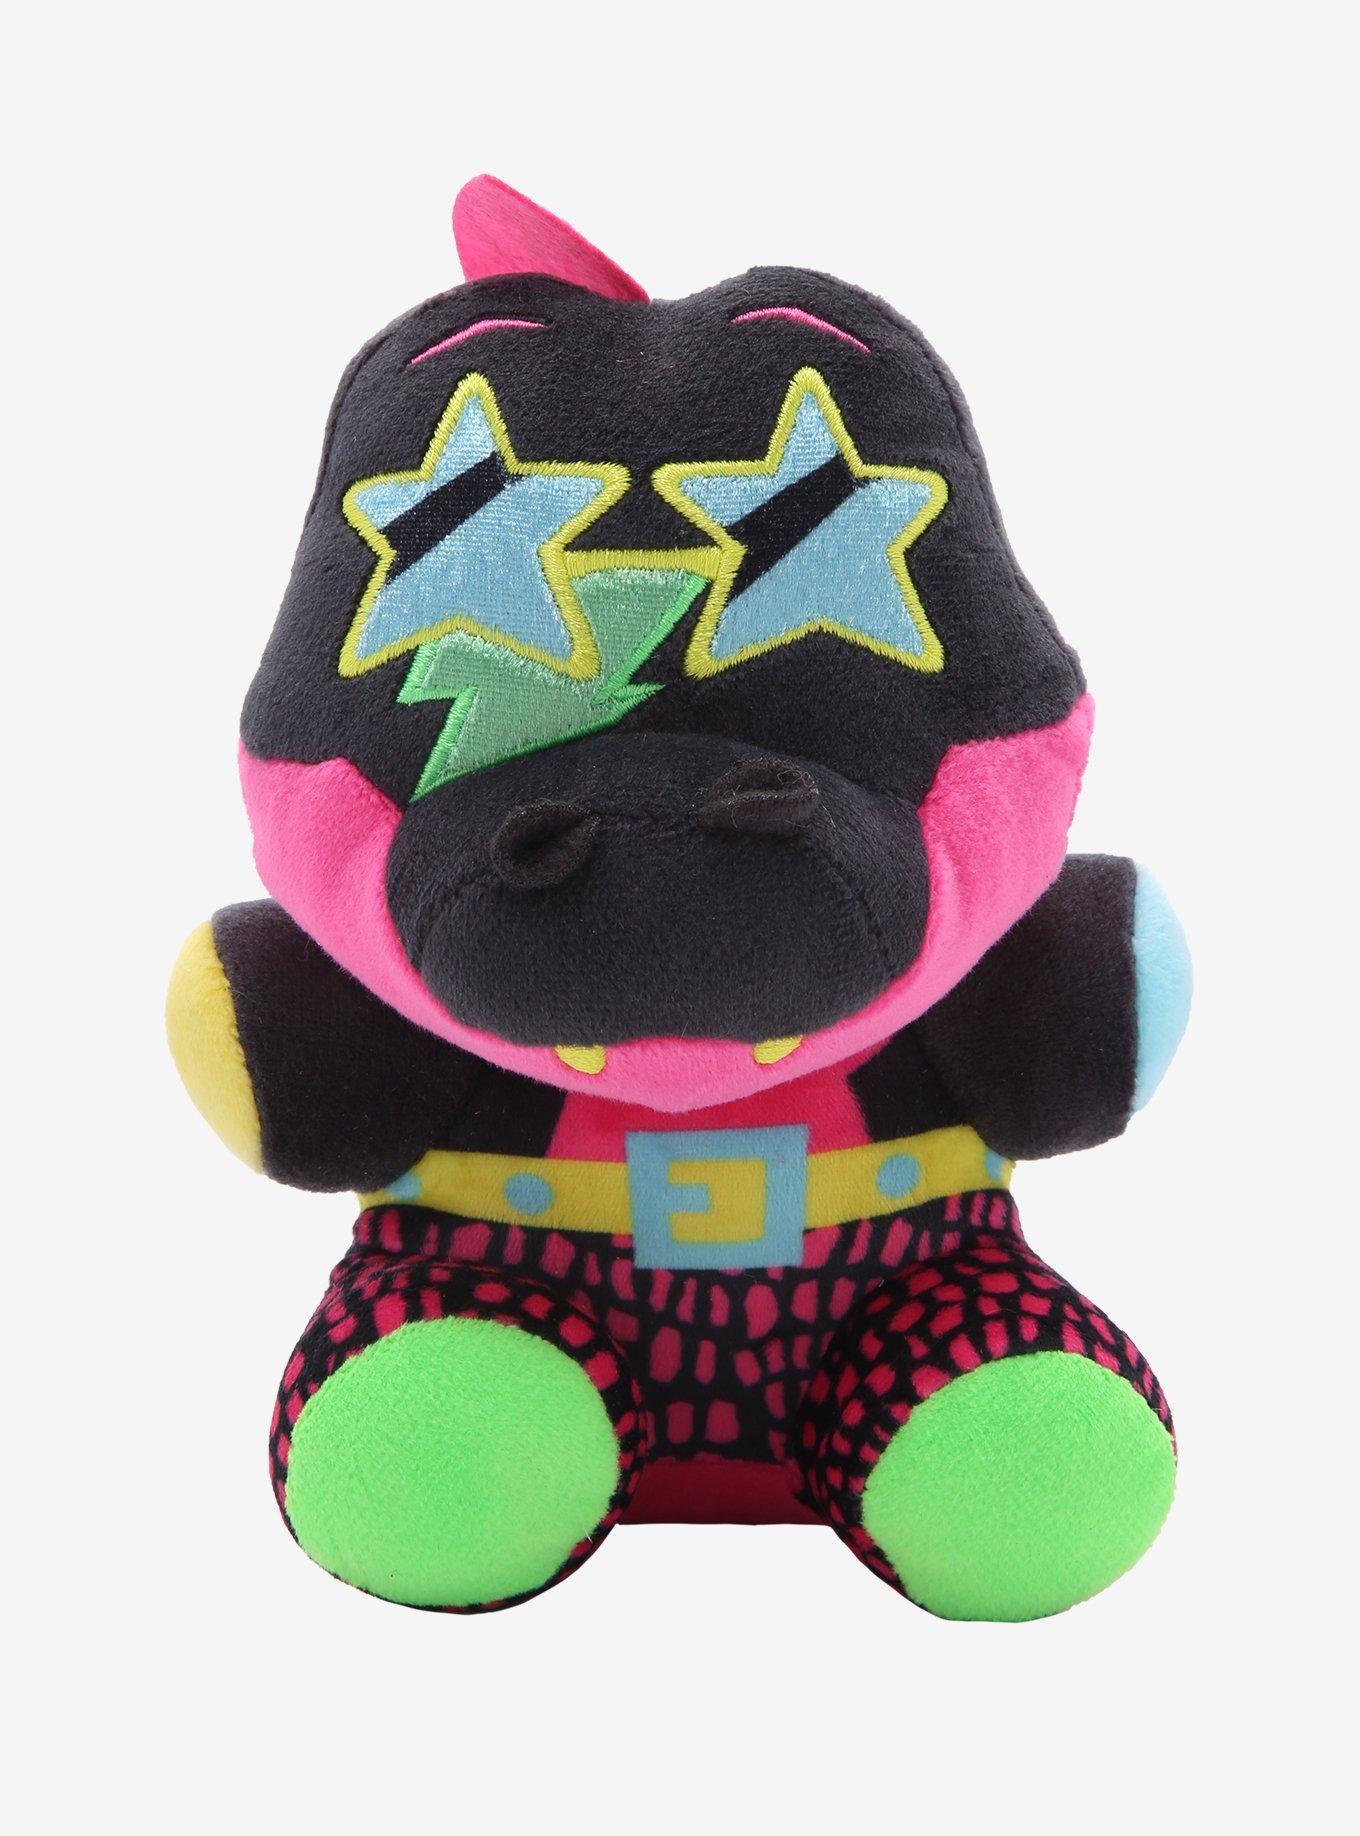 Five Nights At Freddy's Nightmare Freddy Plush Hot Topic Exclusive